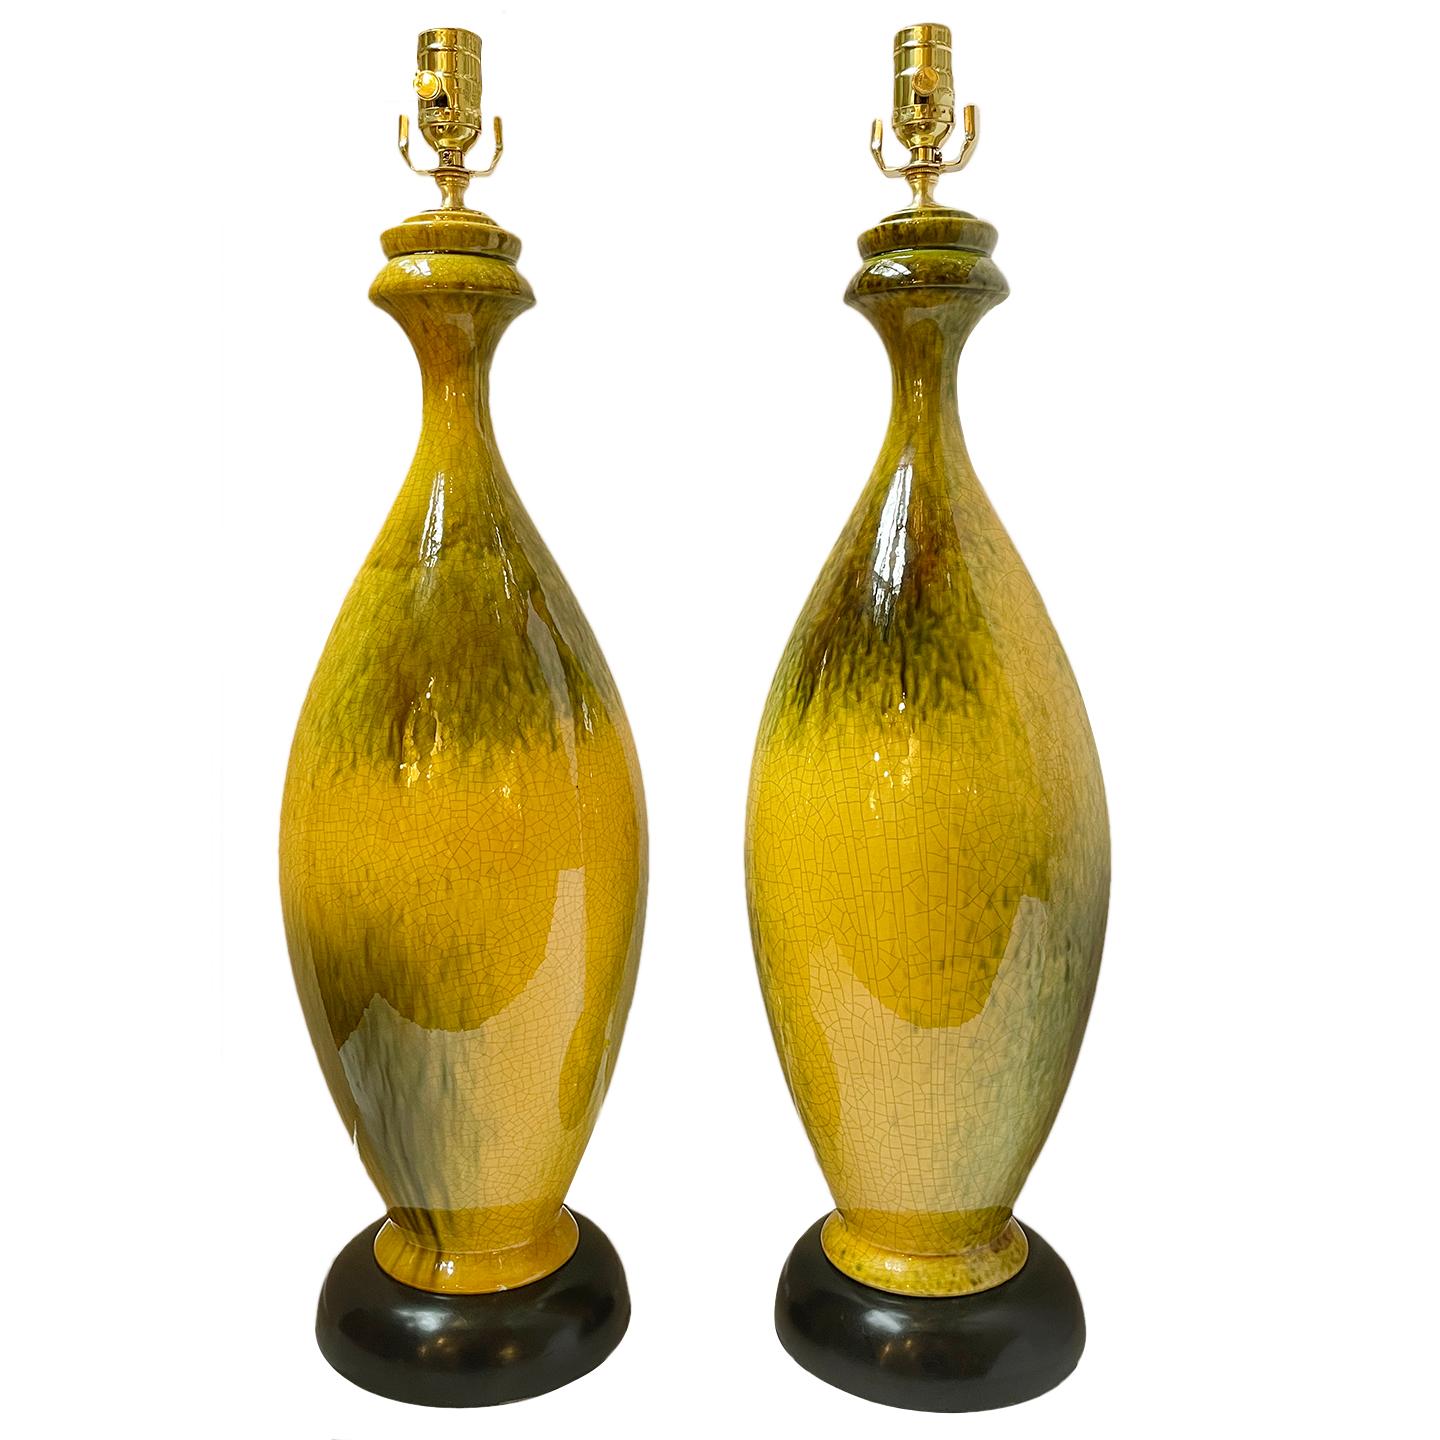 A pair of circa 1960's Italian porcelain table lamps with yellow tinted glaze.

Measurements:
Height of body: 24.5